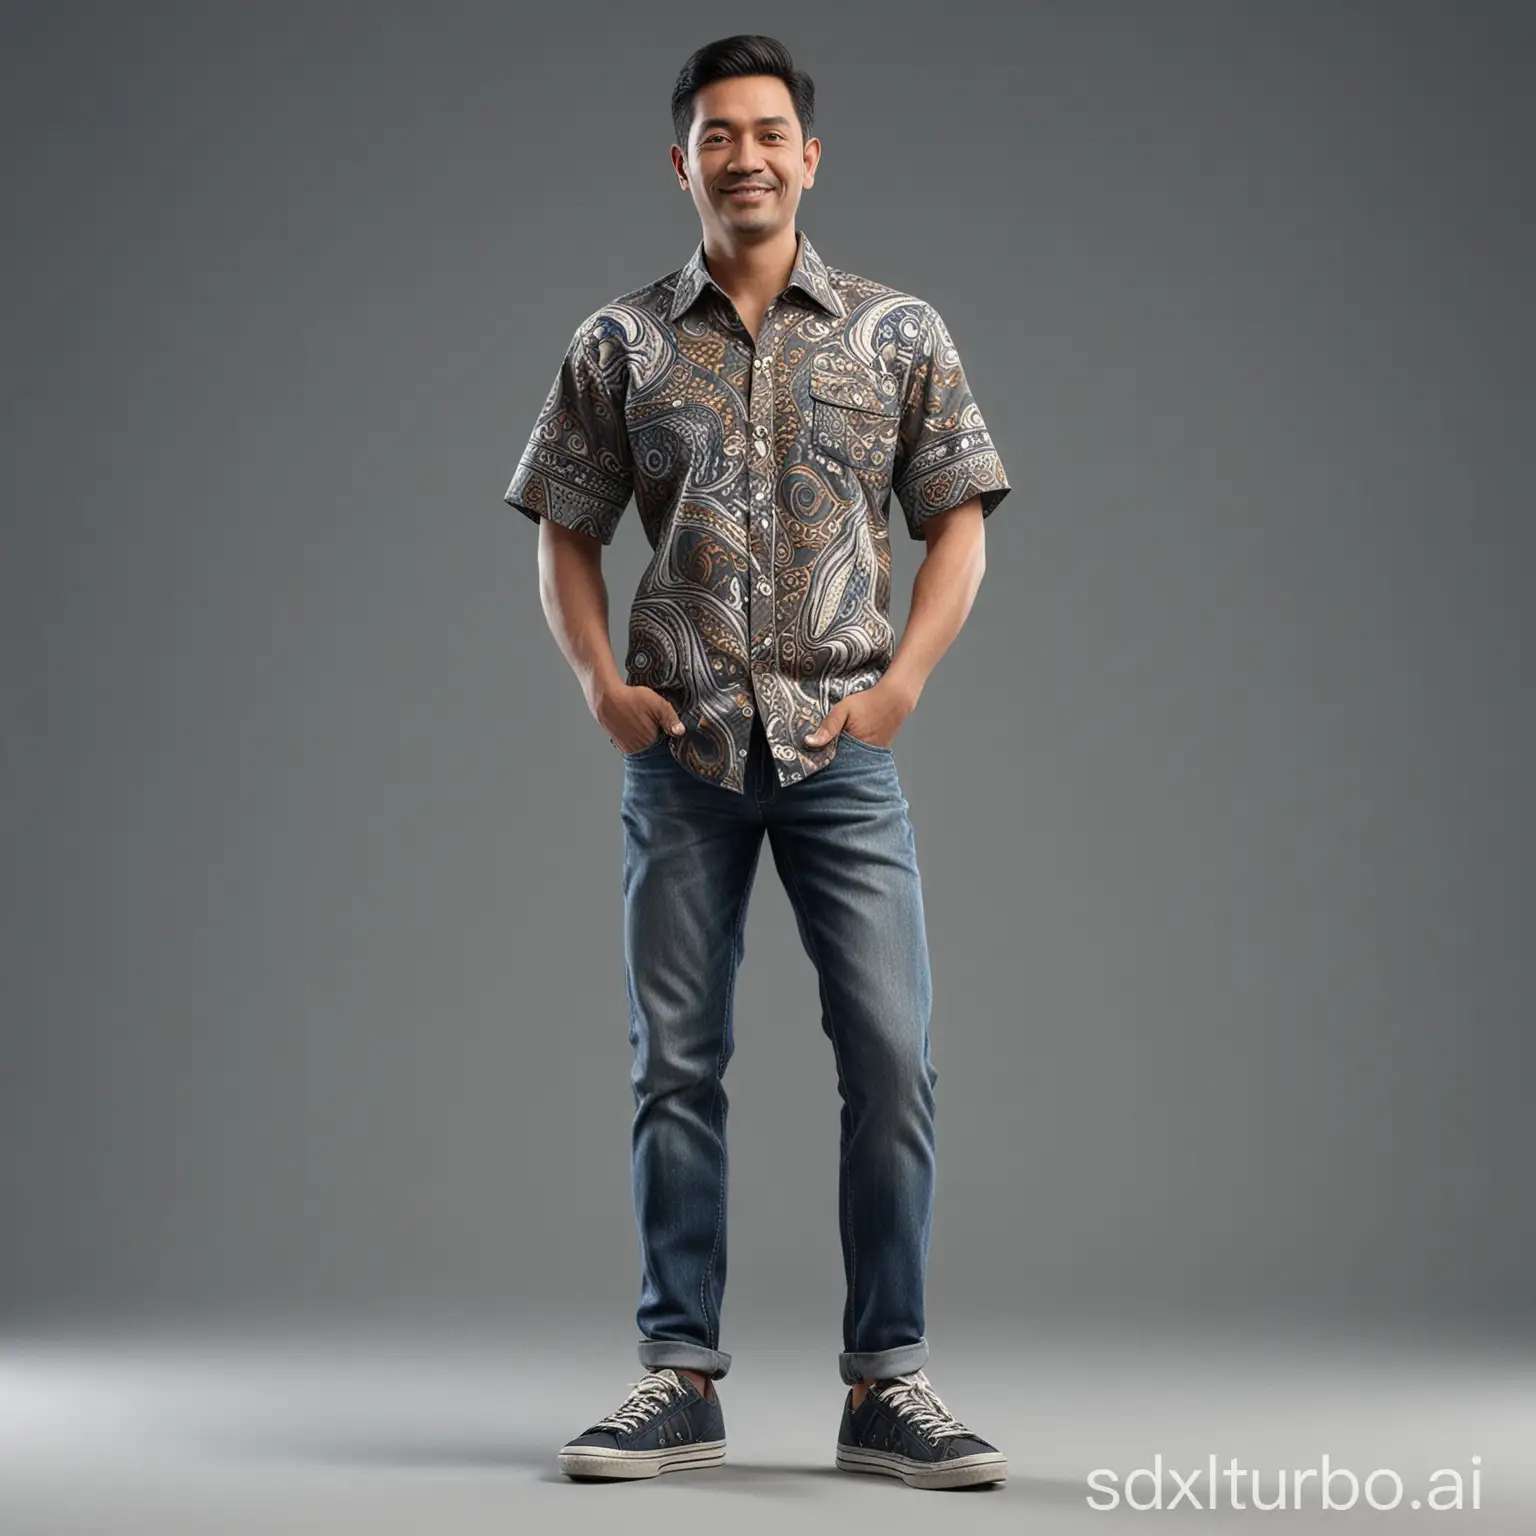 A stunning 3D caricature of Mulyadi, a well-dressed man in a unique batik shirt, jeans, and sneakers. The level of detail is hyper-realistic, capturing every fold and texture of the batik fabric with precision. The background is grey. The overall image is rendered in 8KHD, showcasing the ultra-detailed illustration and the hyper-realistic 3D render., illustration, 3d render